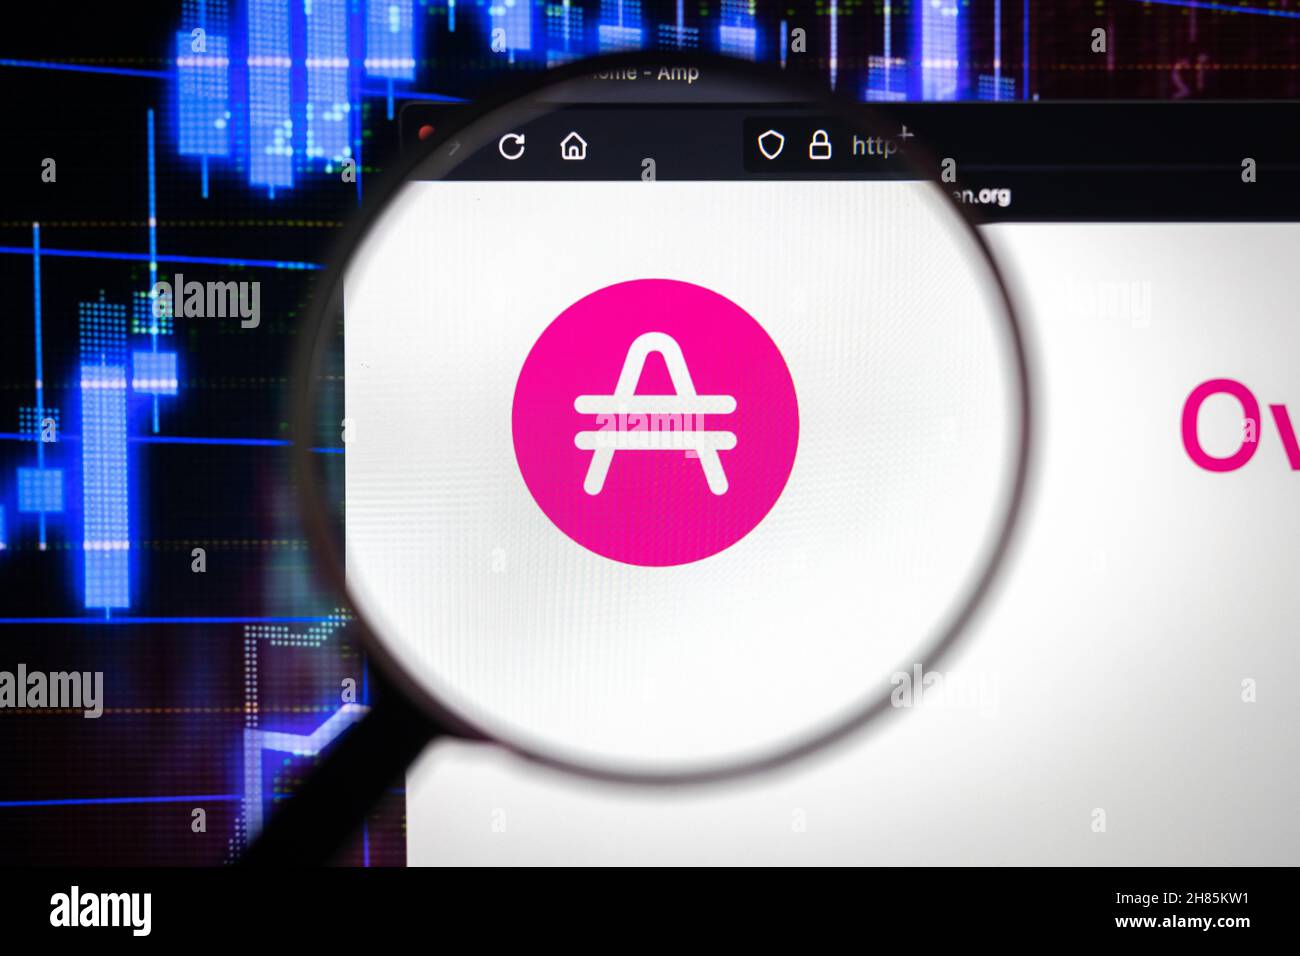 Amp company logo on a website, seen on a computer screen through a magnifying glass. Stock Photo